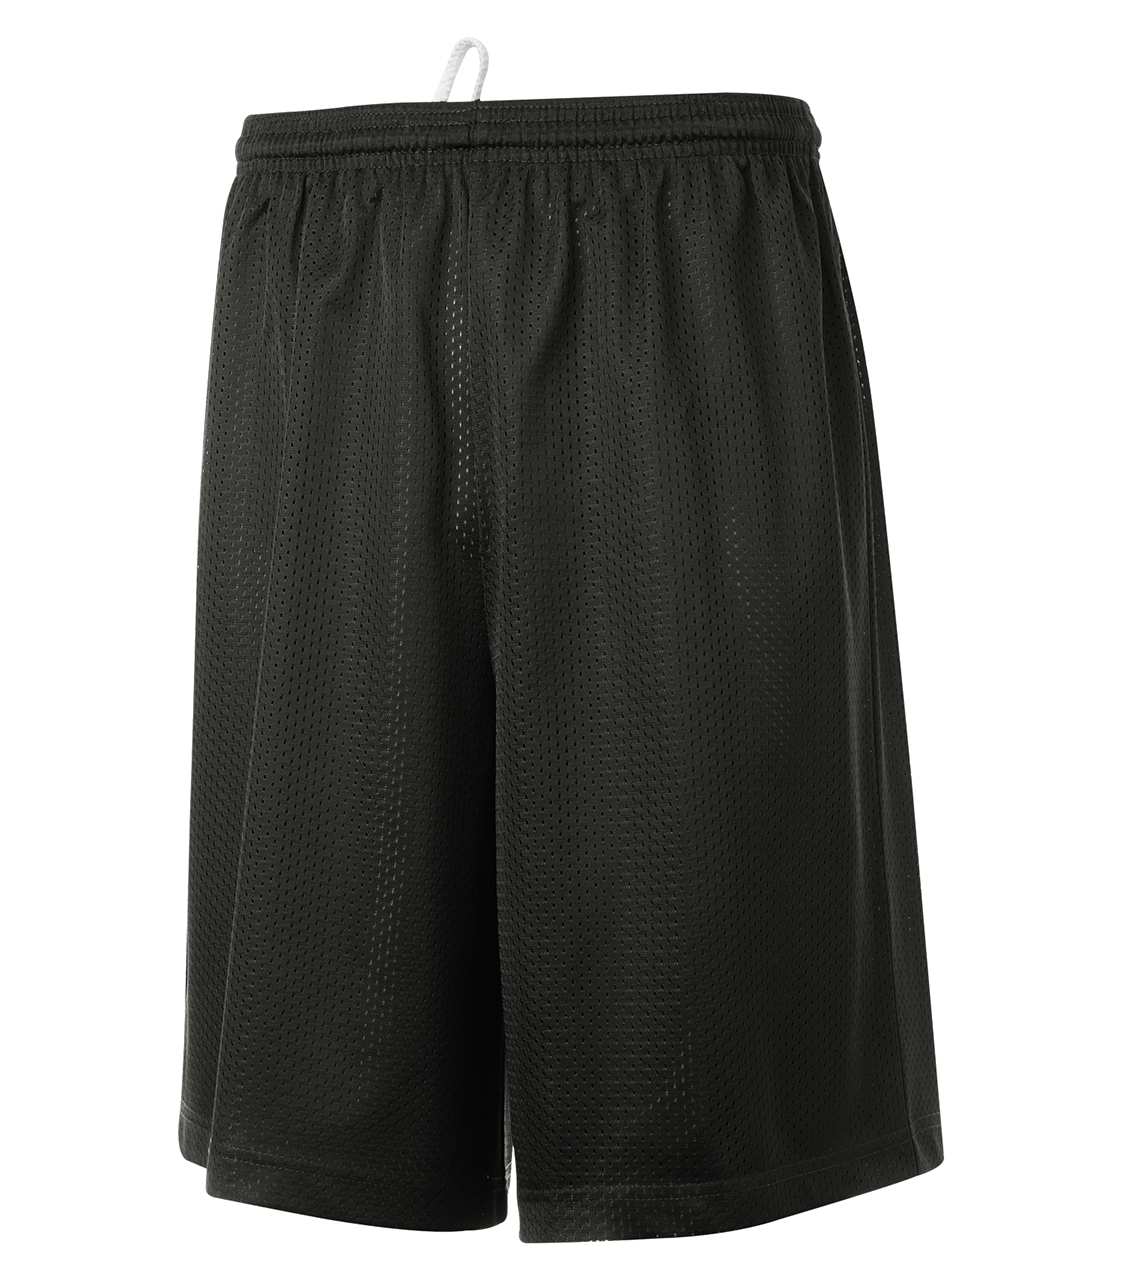 Picture of ATC Pro Mesh Short